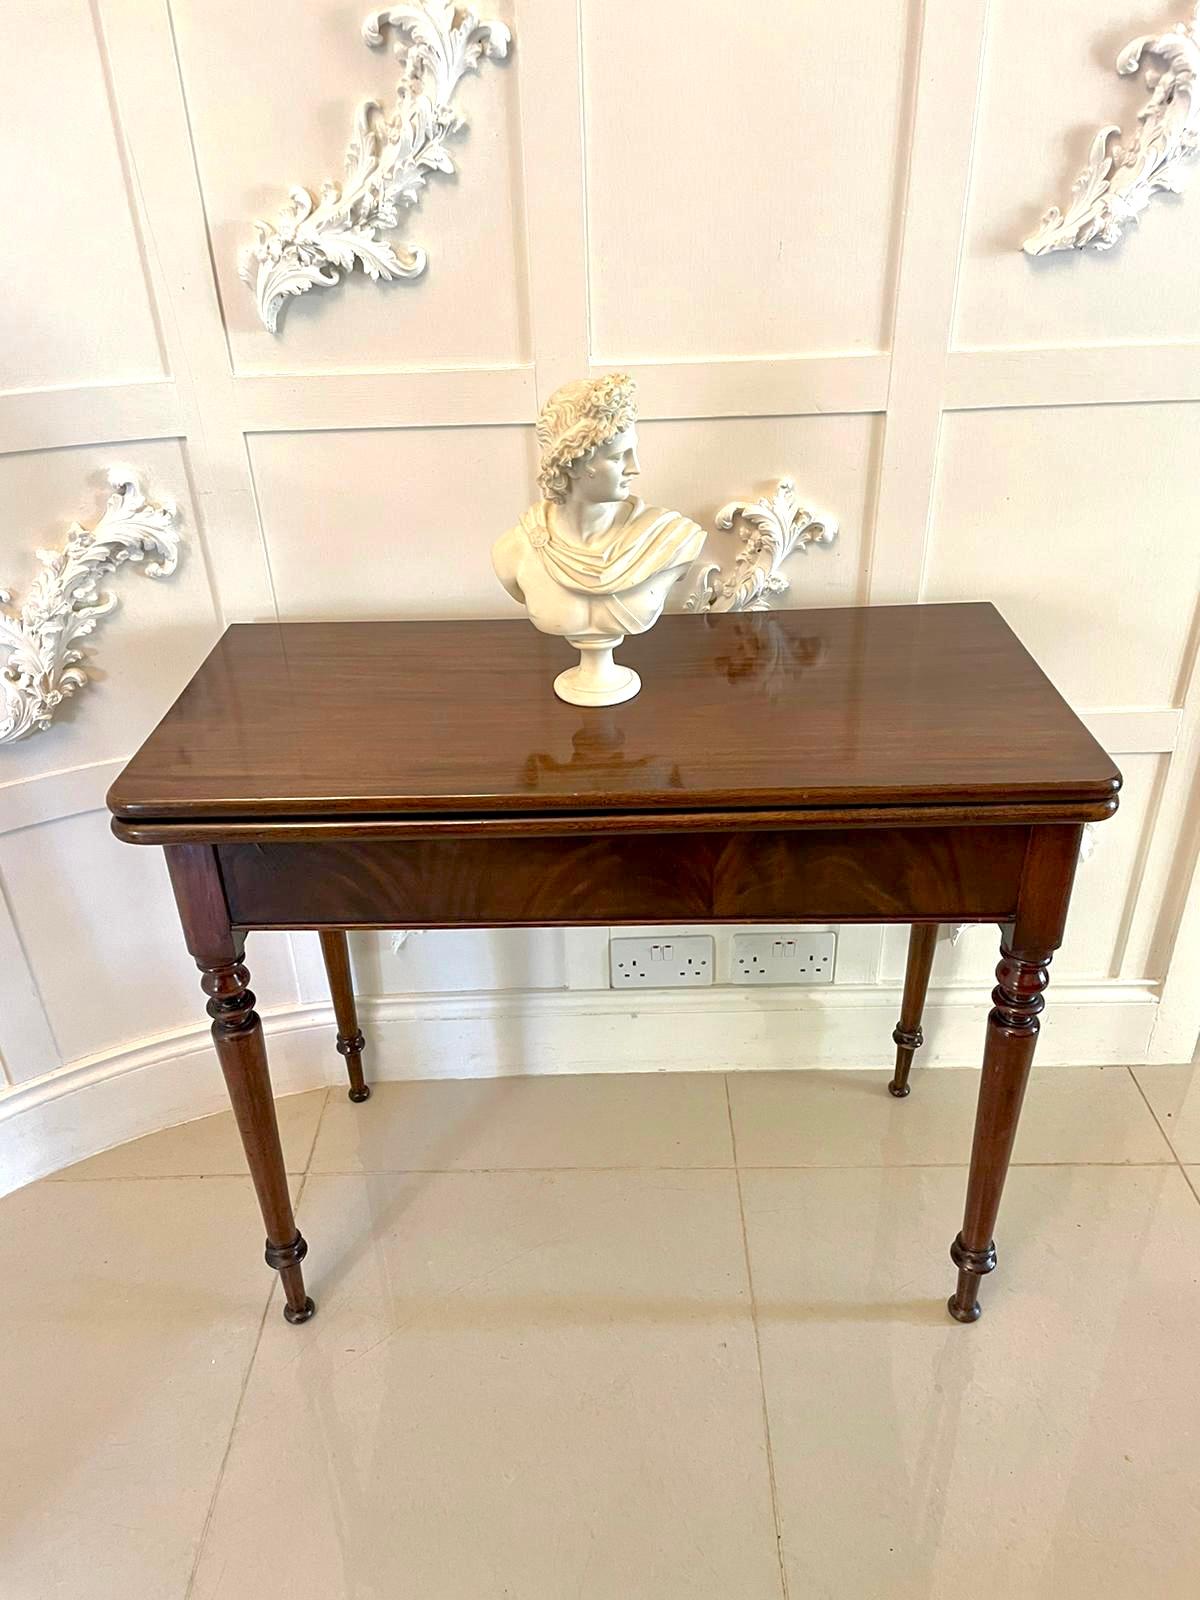 Antique George III quality mahogany fold over tea/side table having a quality mahogany fold over top opening to reveal a polished interior, mahogany shaped frieze, standing on four elegant turned tapering legs with bun feet.

Measures: 77.5 x 91 x